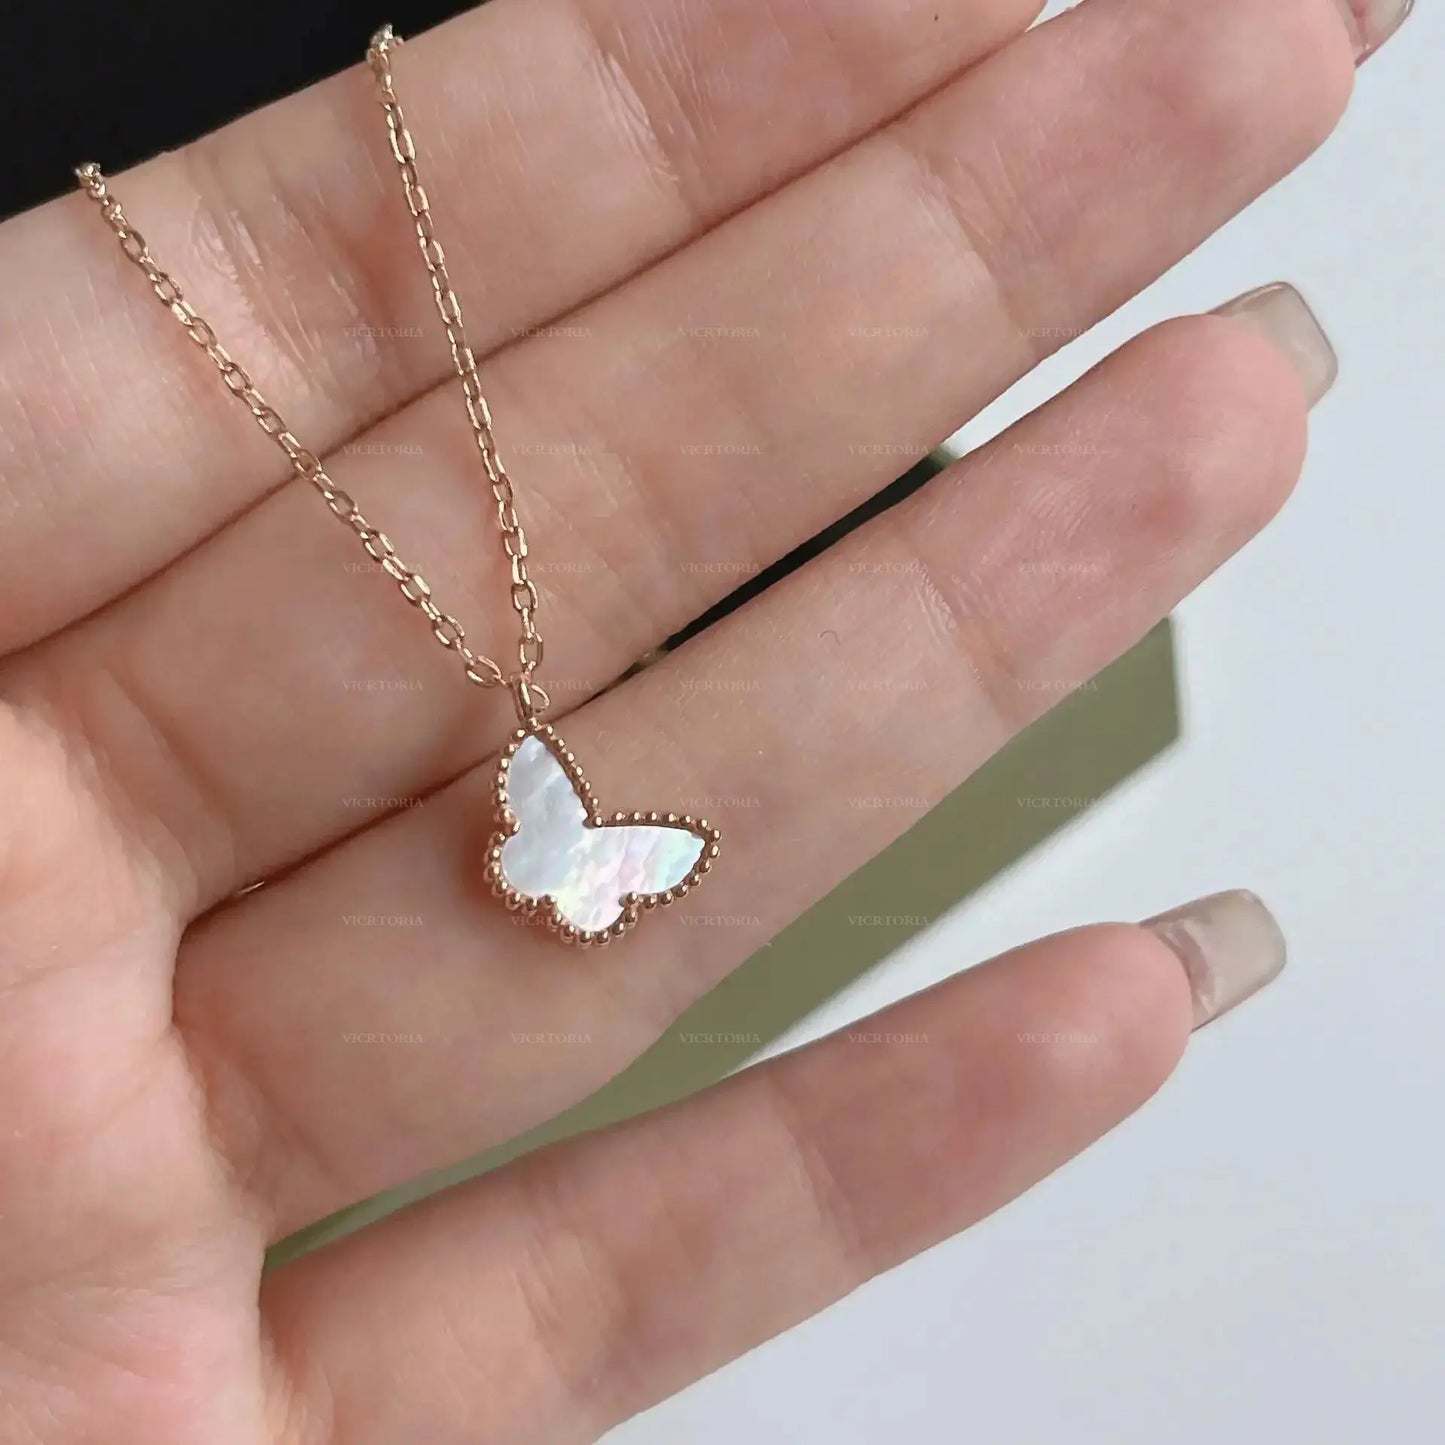 Beimu Butterfly Shell Turquoise Pendant Classic 925 Pure Silver Necklace For Women's Fashion High Quality Jewelry Gift